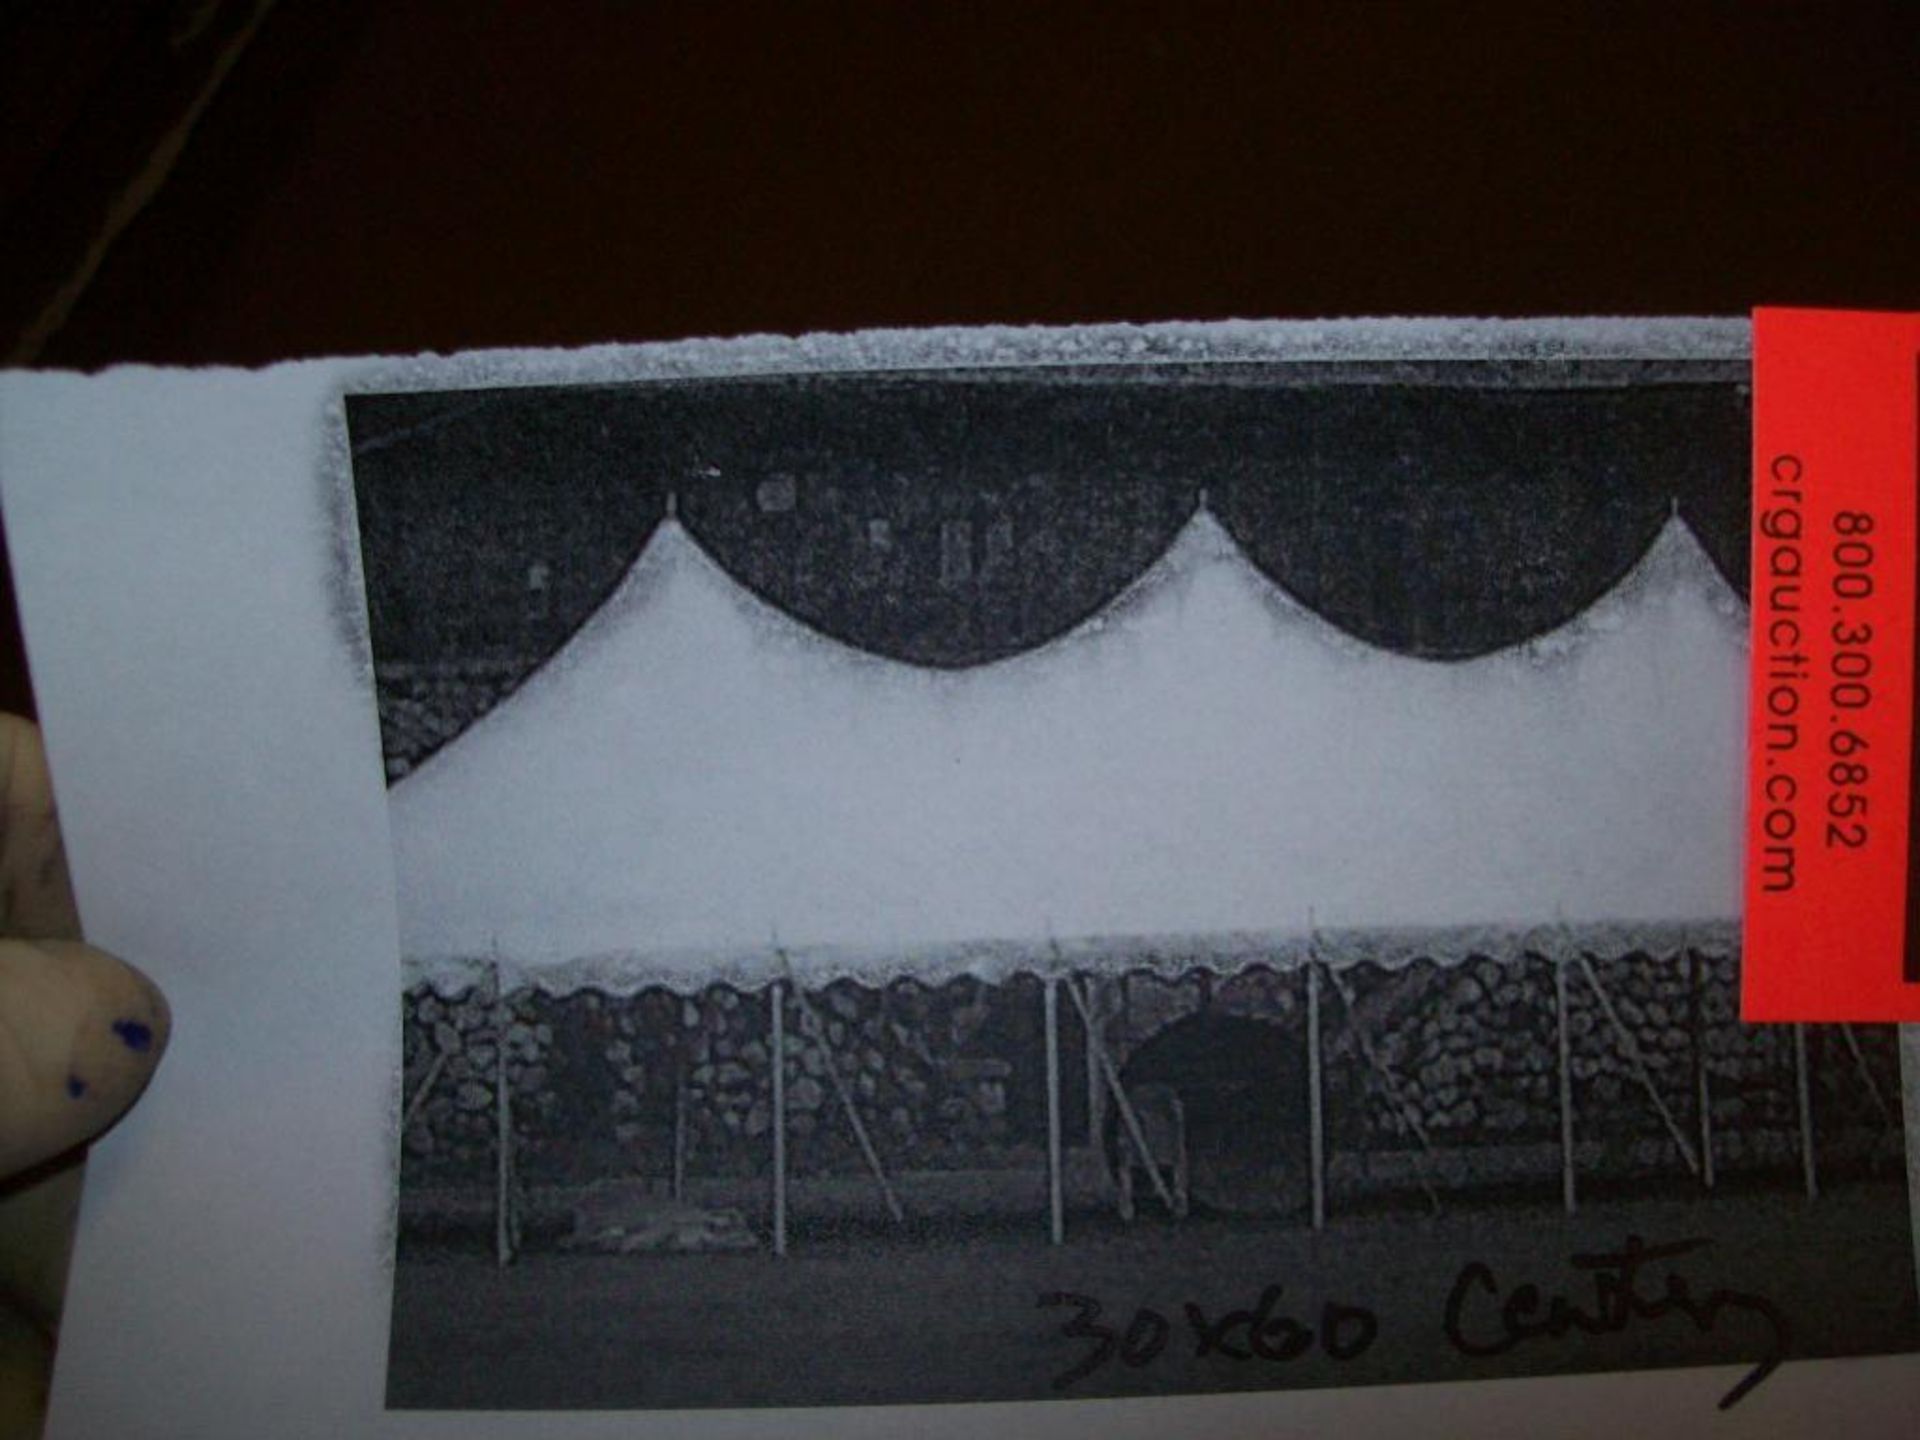 Anchor 30' x 60' white century tent, complete with top poles, stakes, and straps, no wall, A/B grade - Image 2 of 3